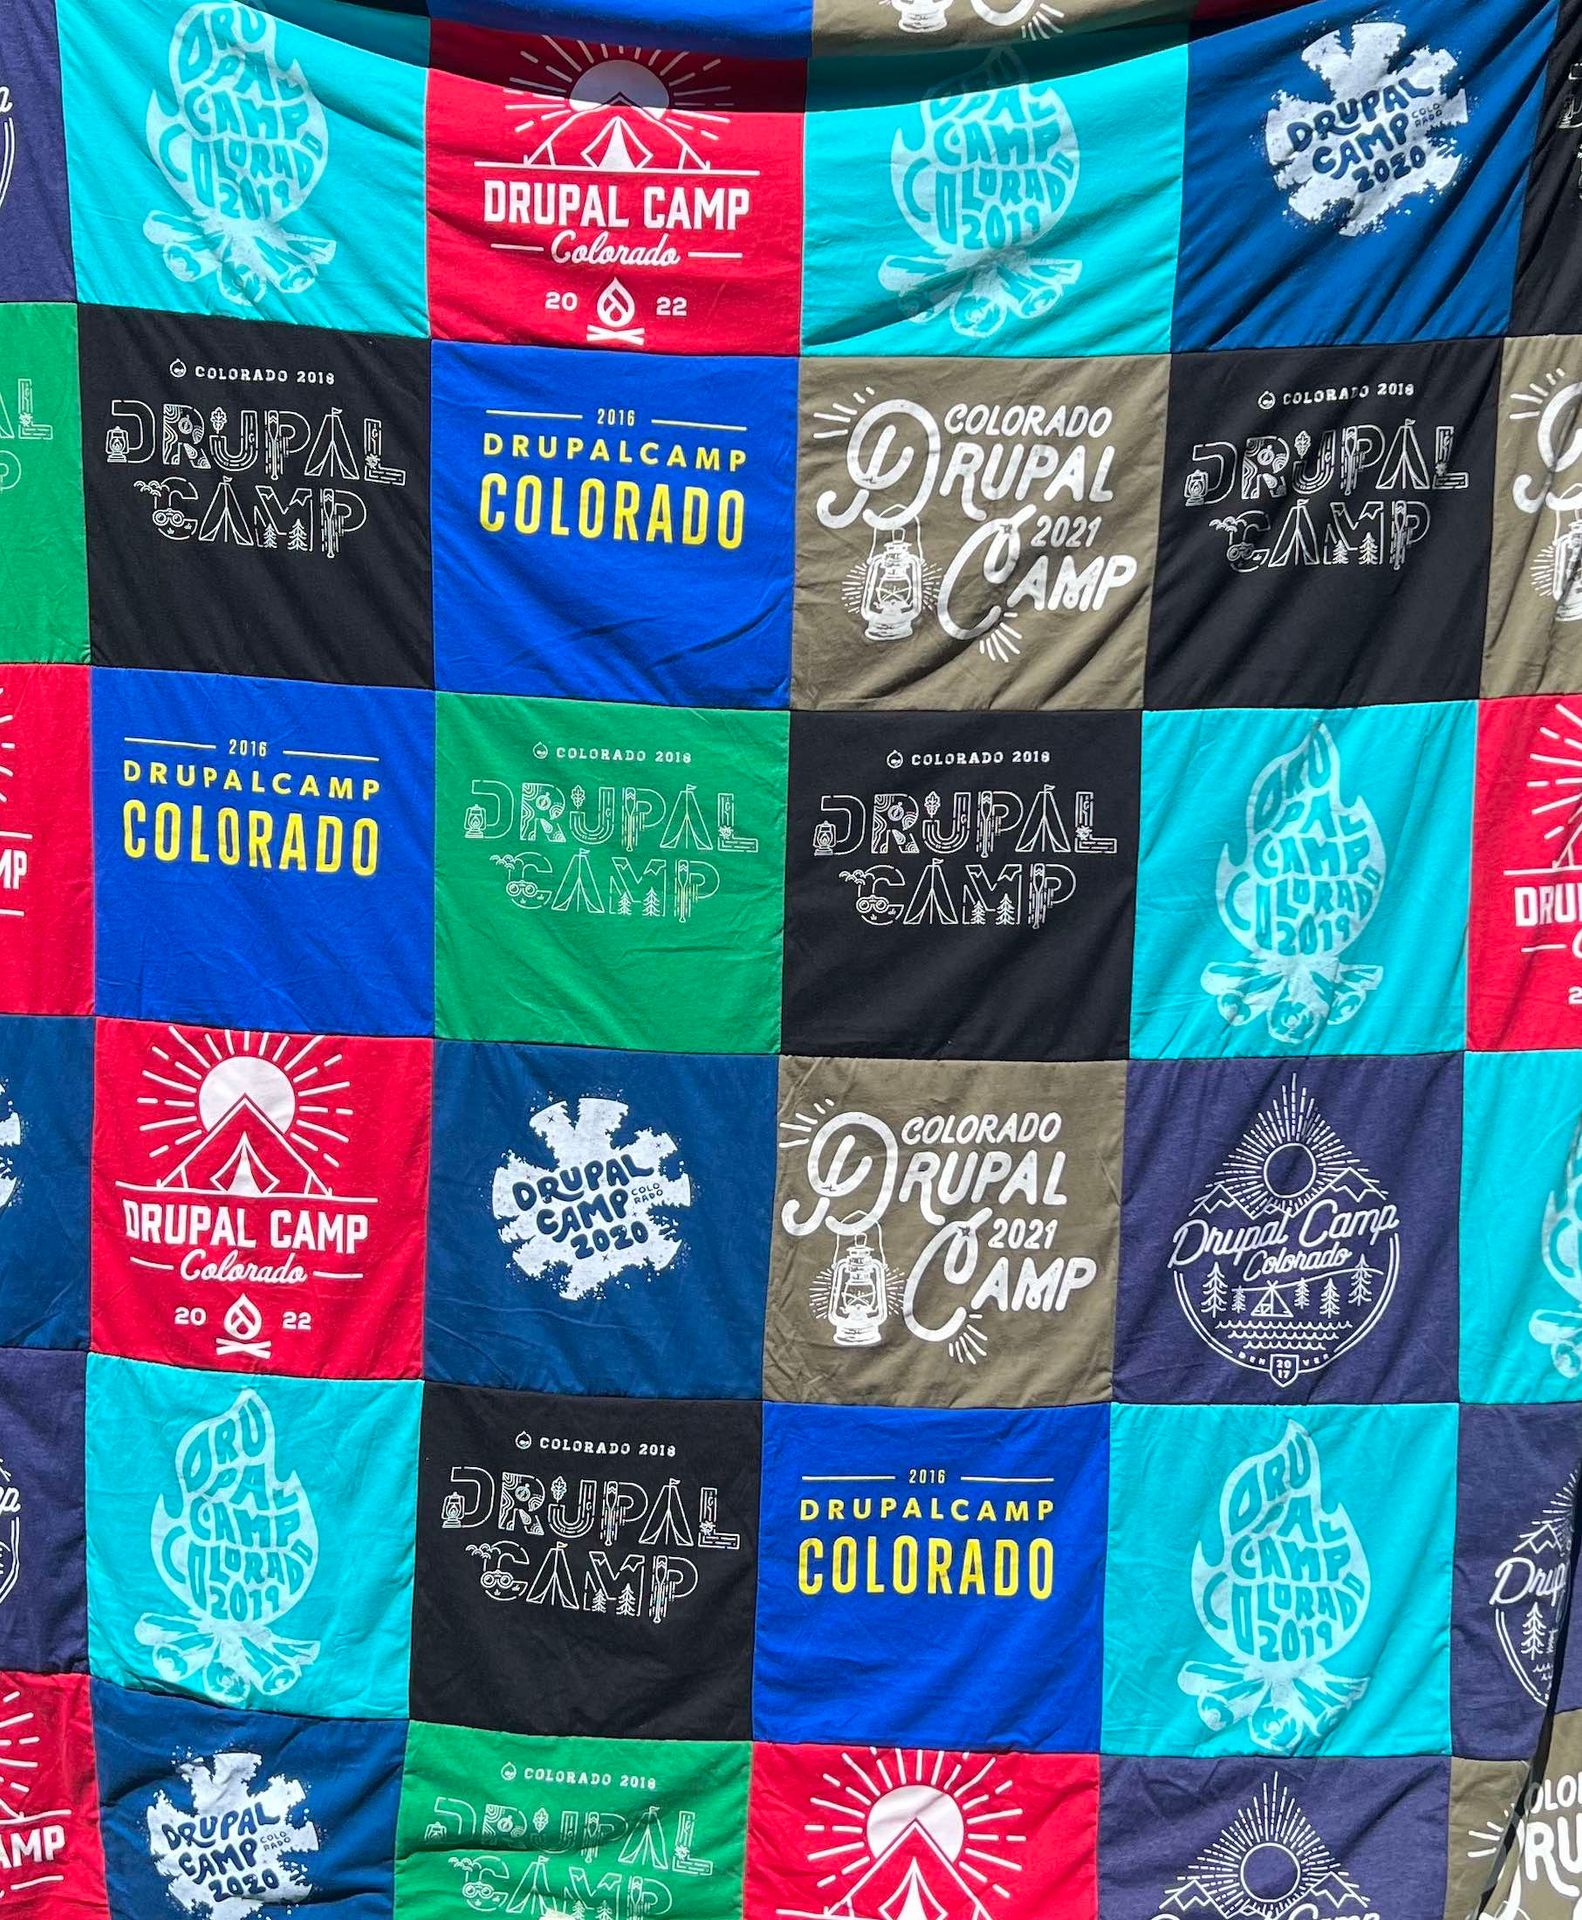 Quilt made with previous years' DrupalCamp Colorado hoodies